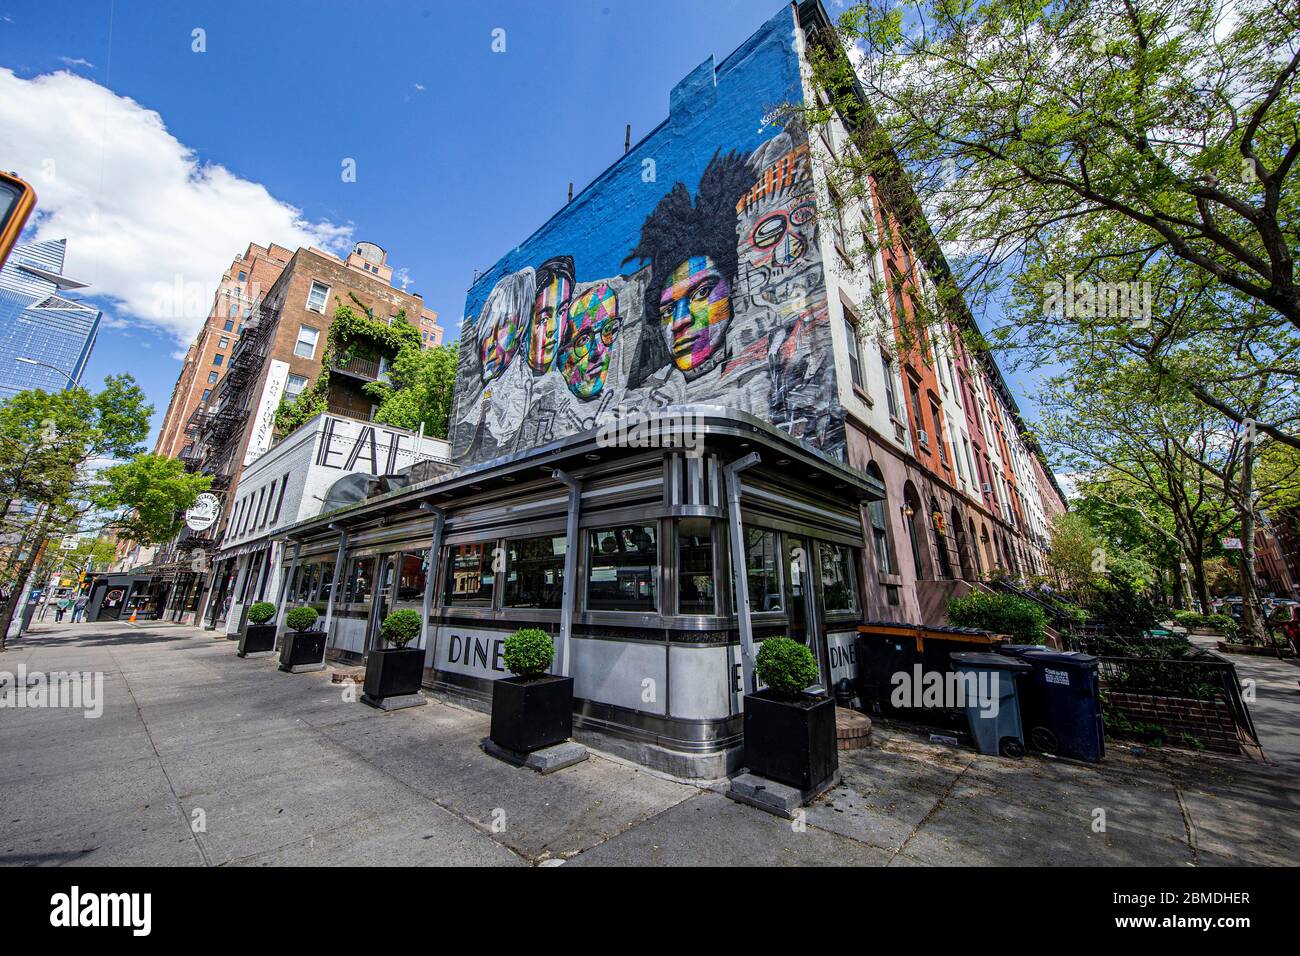 New York, N.Y/USA - 7th May 2020: The Empire Diner is closed due to health risks of COVID-19. Credit: Gordon Donovan/Alamy Live News Stock Photo